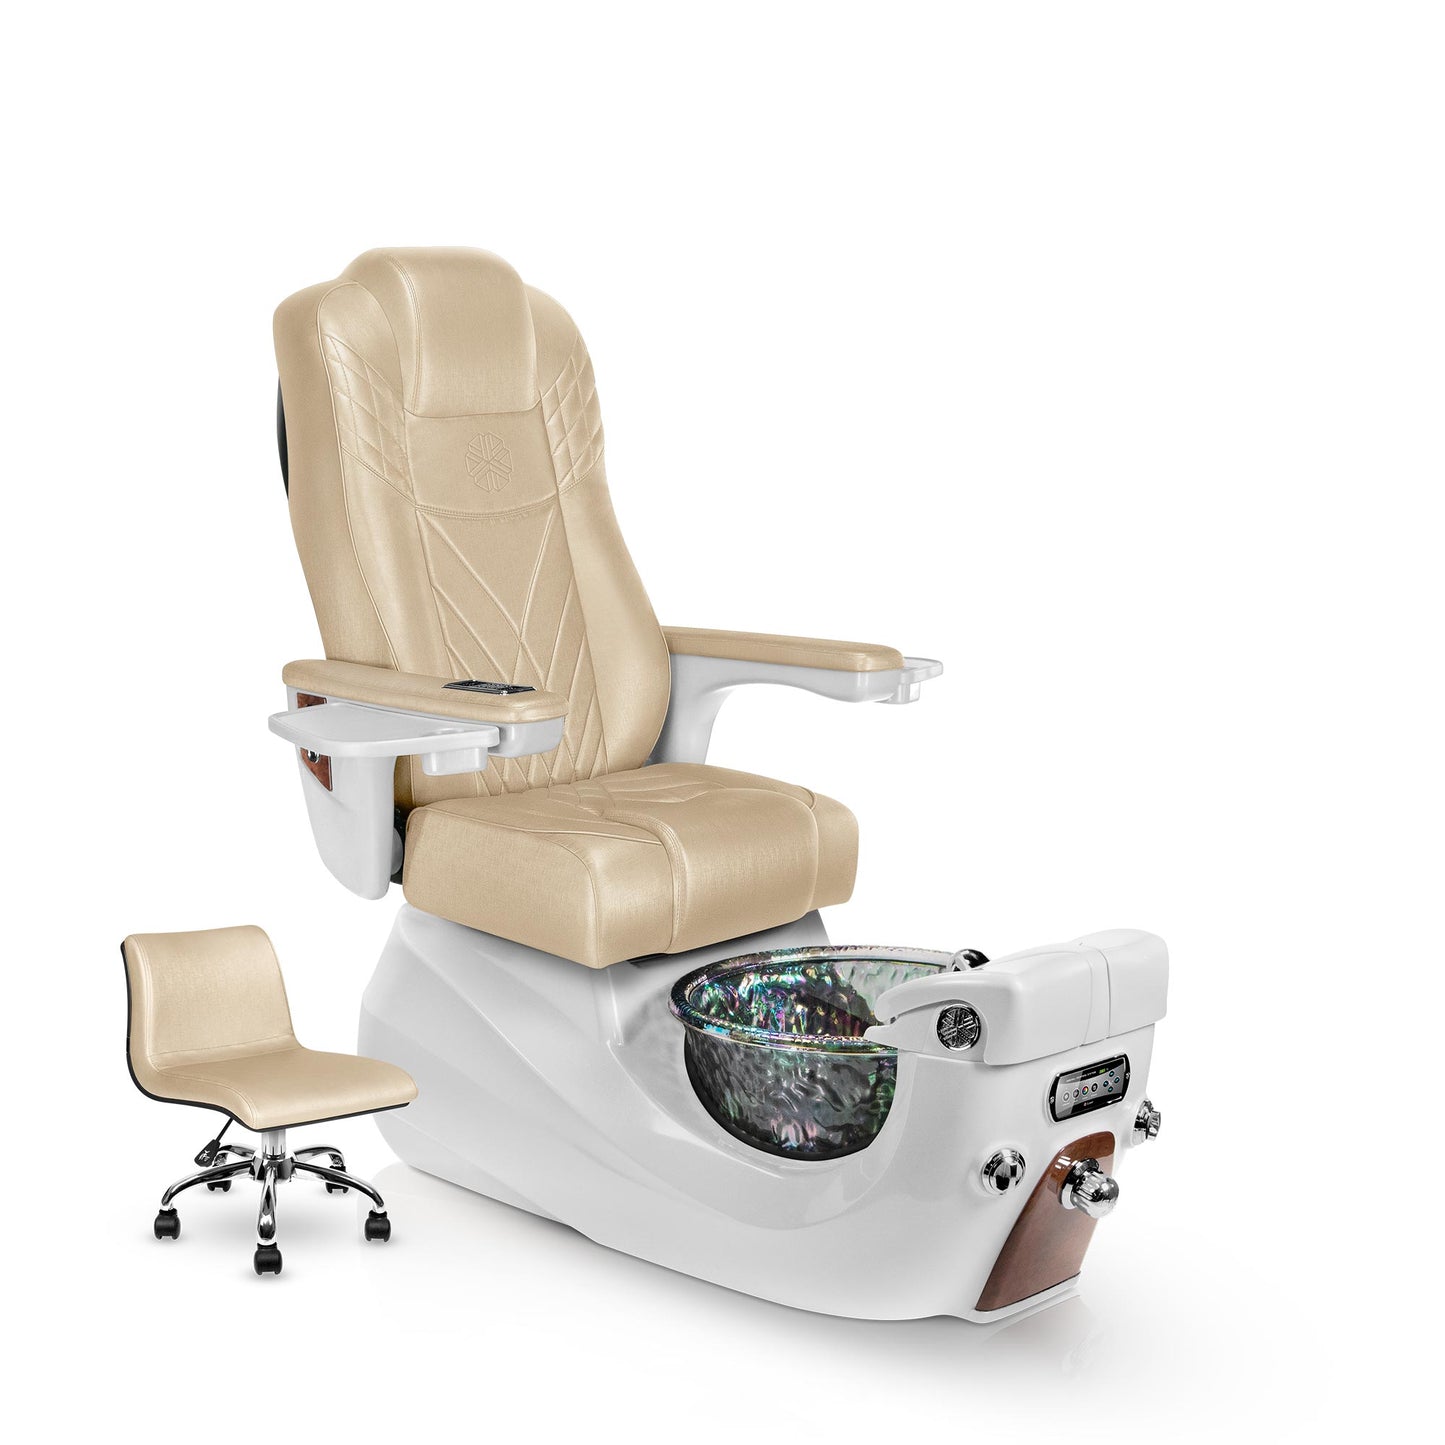 Lexor LIBERTÉ pedicure chair with glazed gold cushion and white pearl spa base